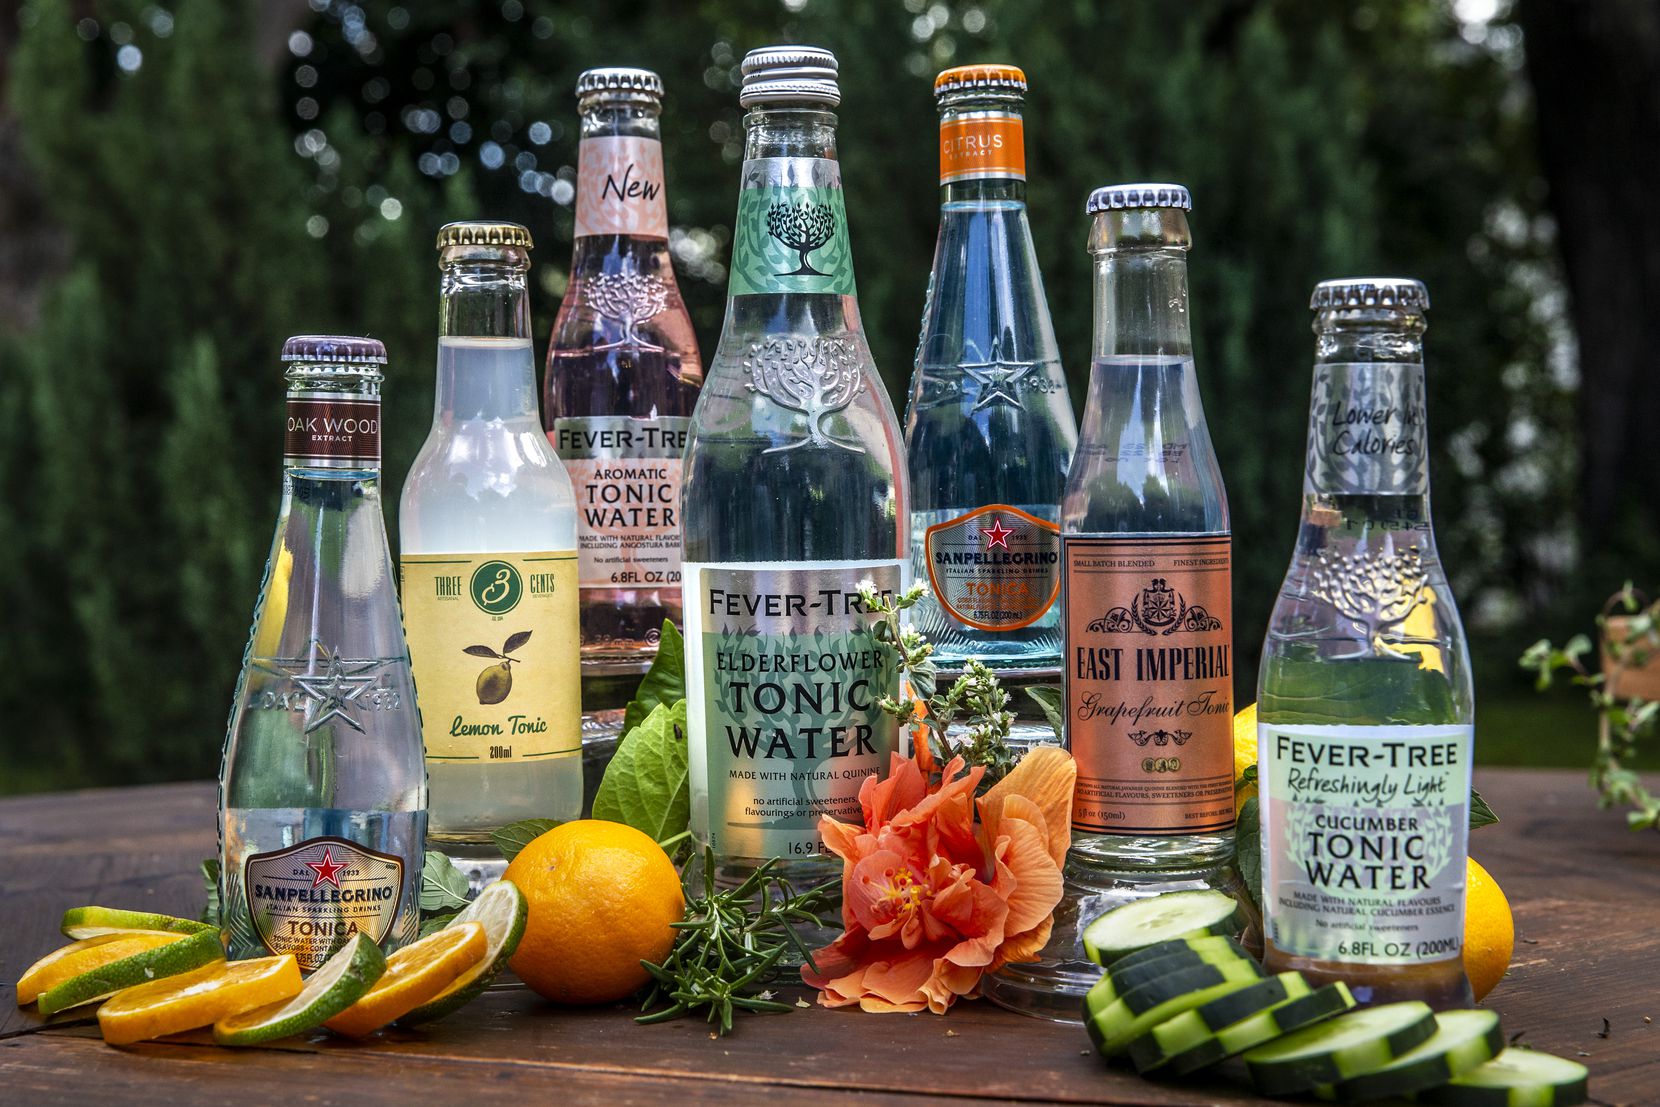 An array of bottled flavored tonic waters